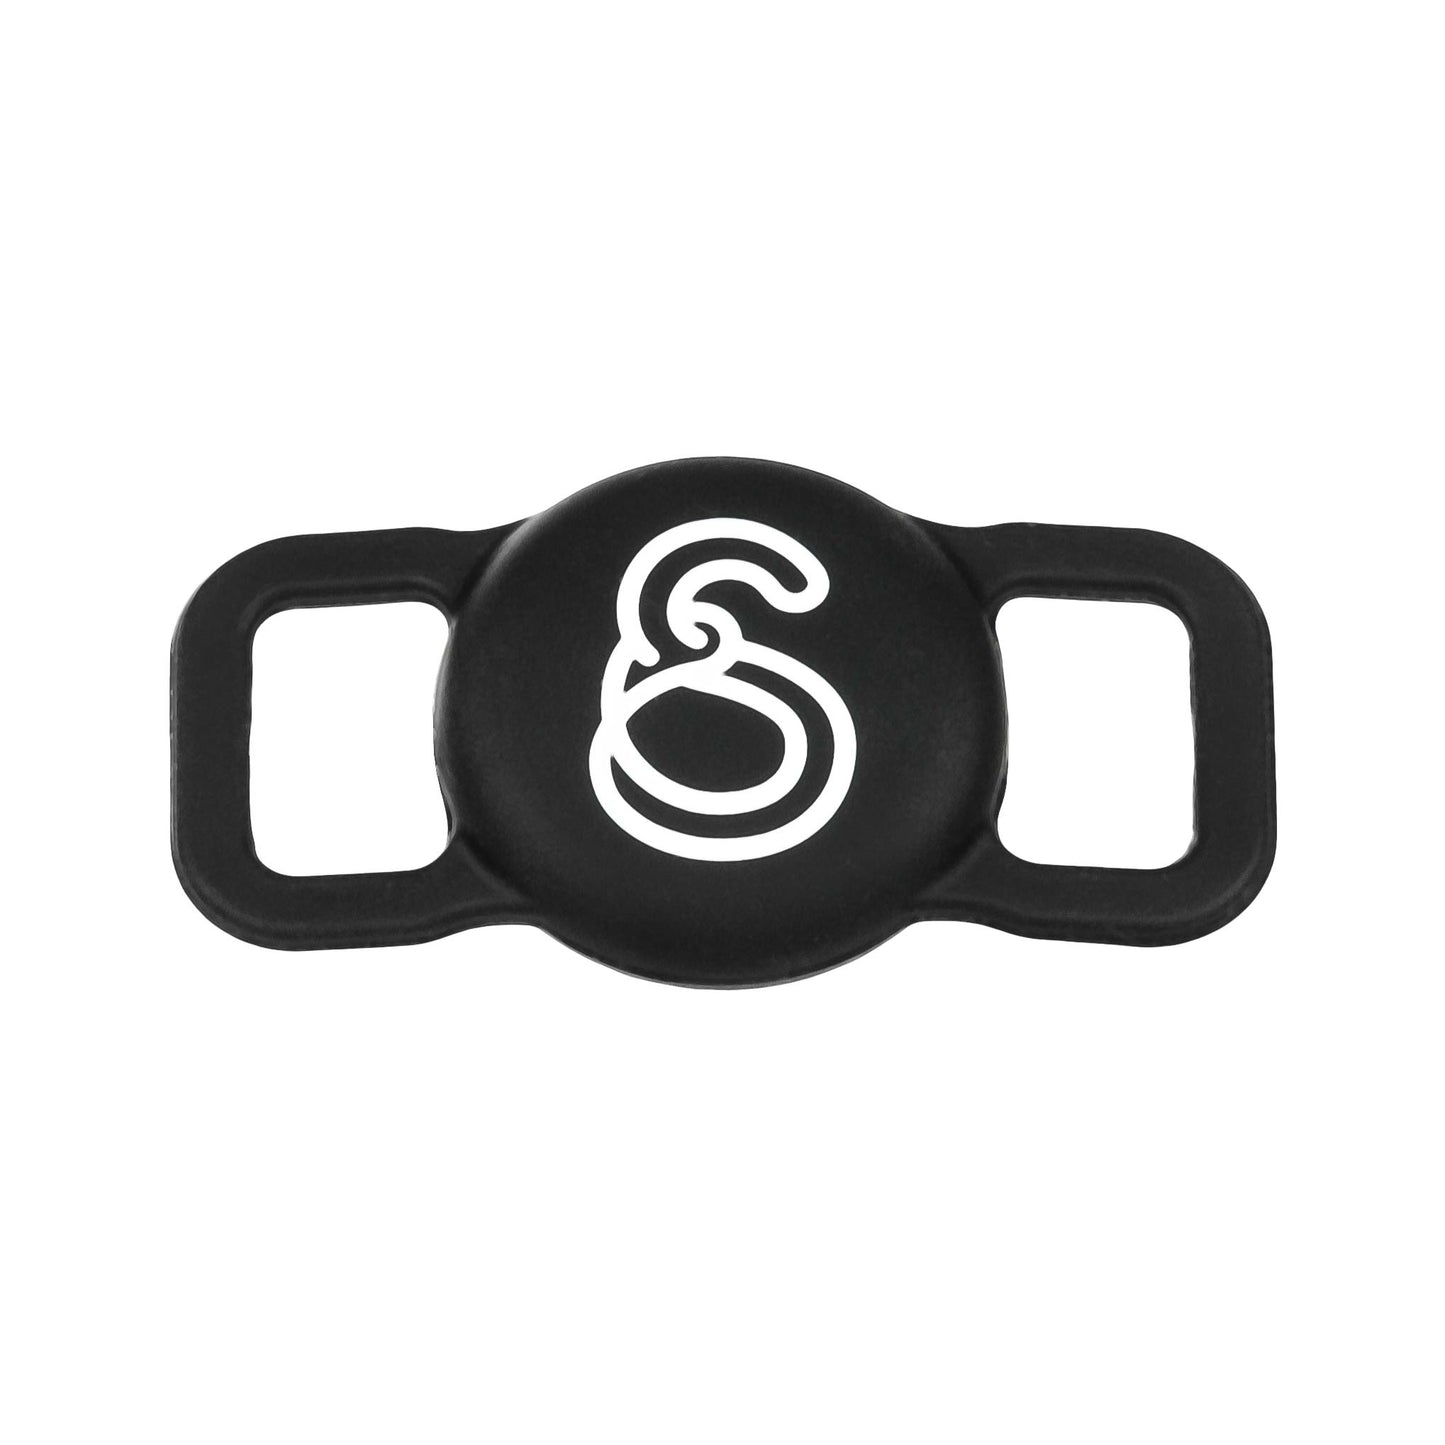 Black Silicone AirTag Holder with white S logo